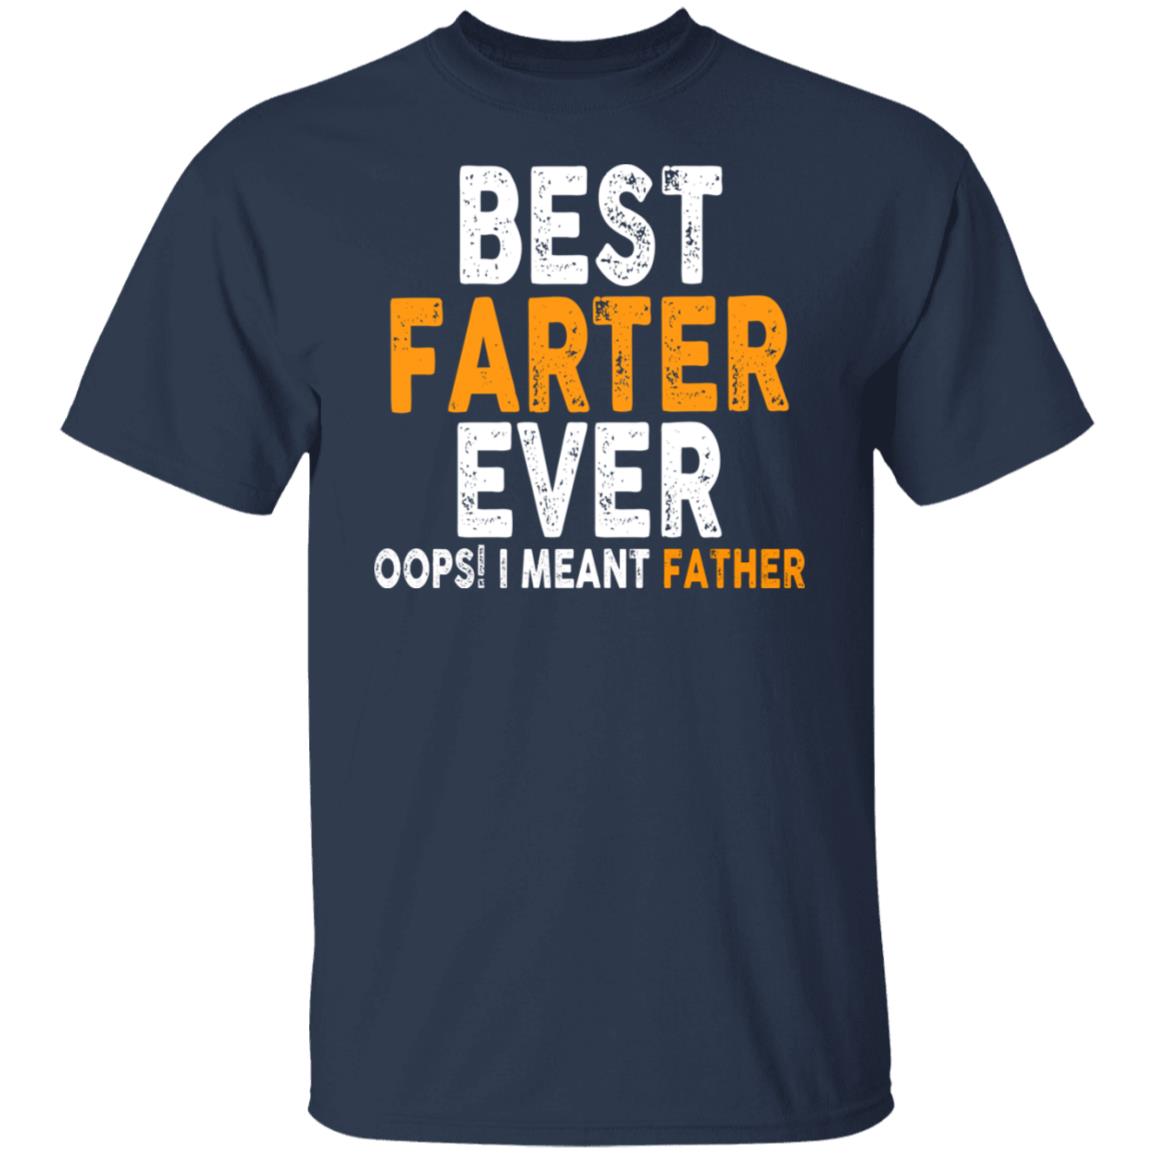 Best Farter Ever Oops I Meant Father Funny T-Shirt